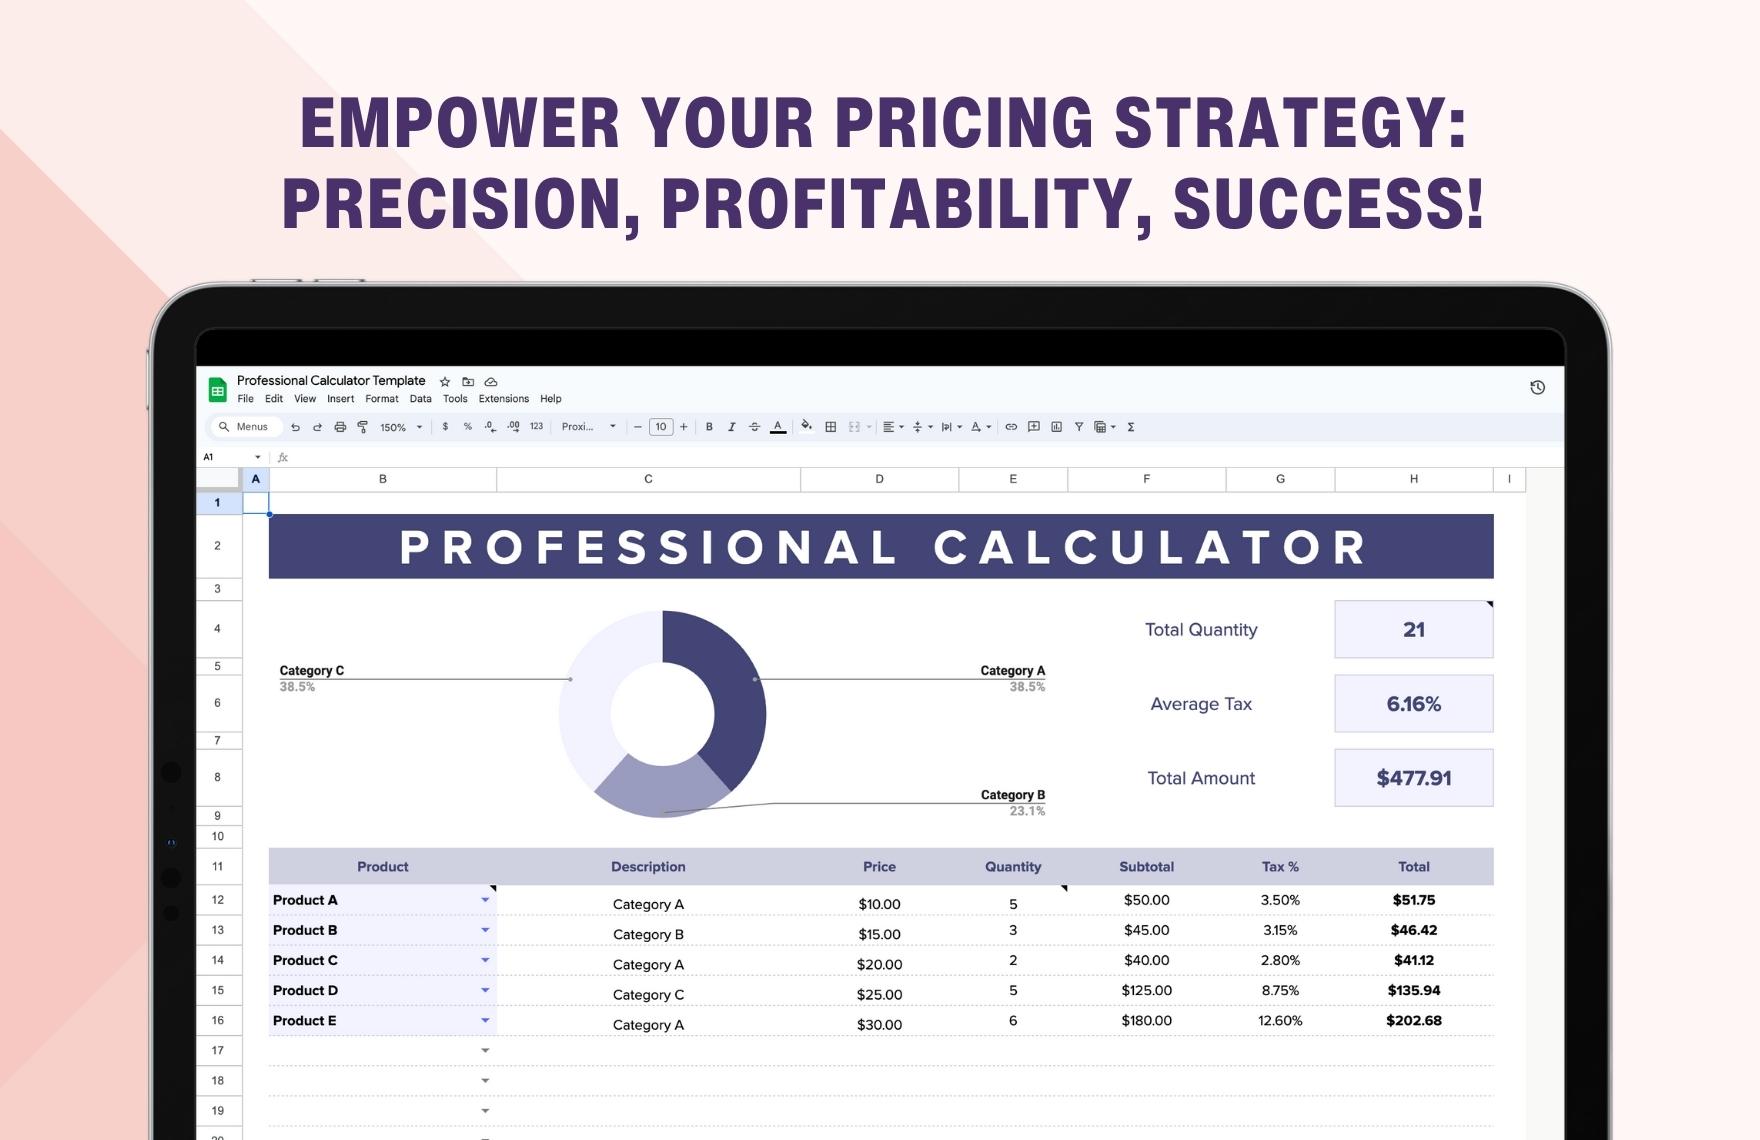 Professional Calculator Template - Download in Excel, Google Sheets ...